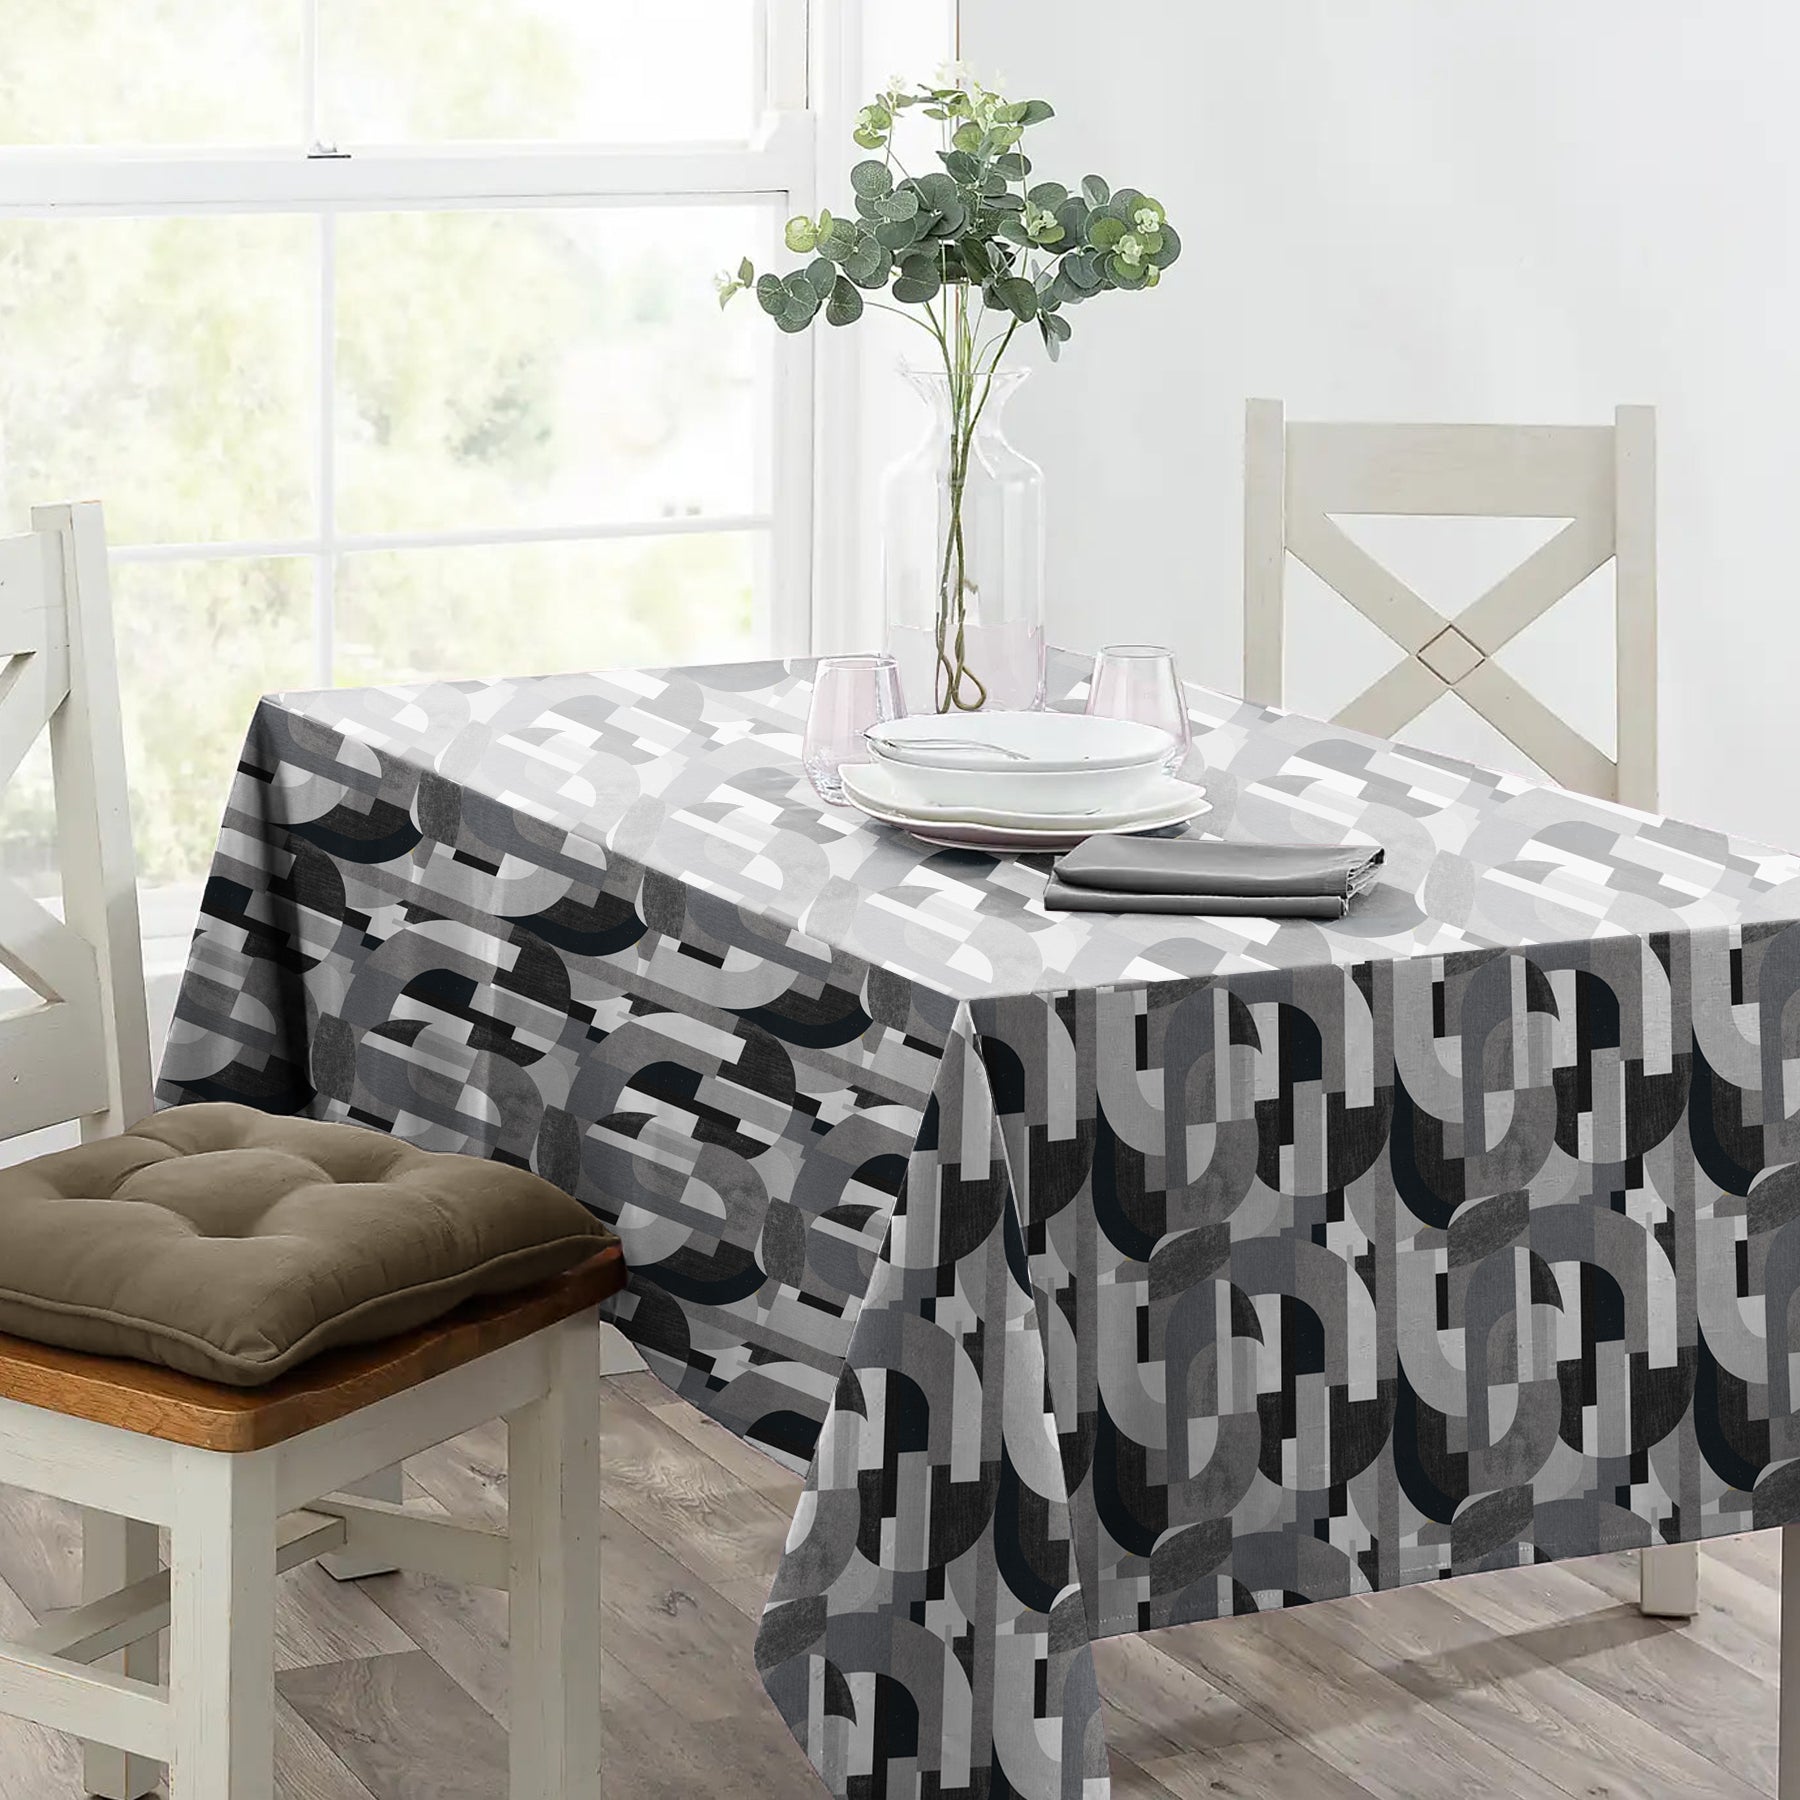 ILLUSION CURVES 6 SEATER TABLE CLOTH BLACK/GRAY